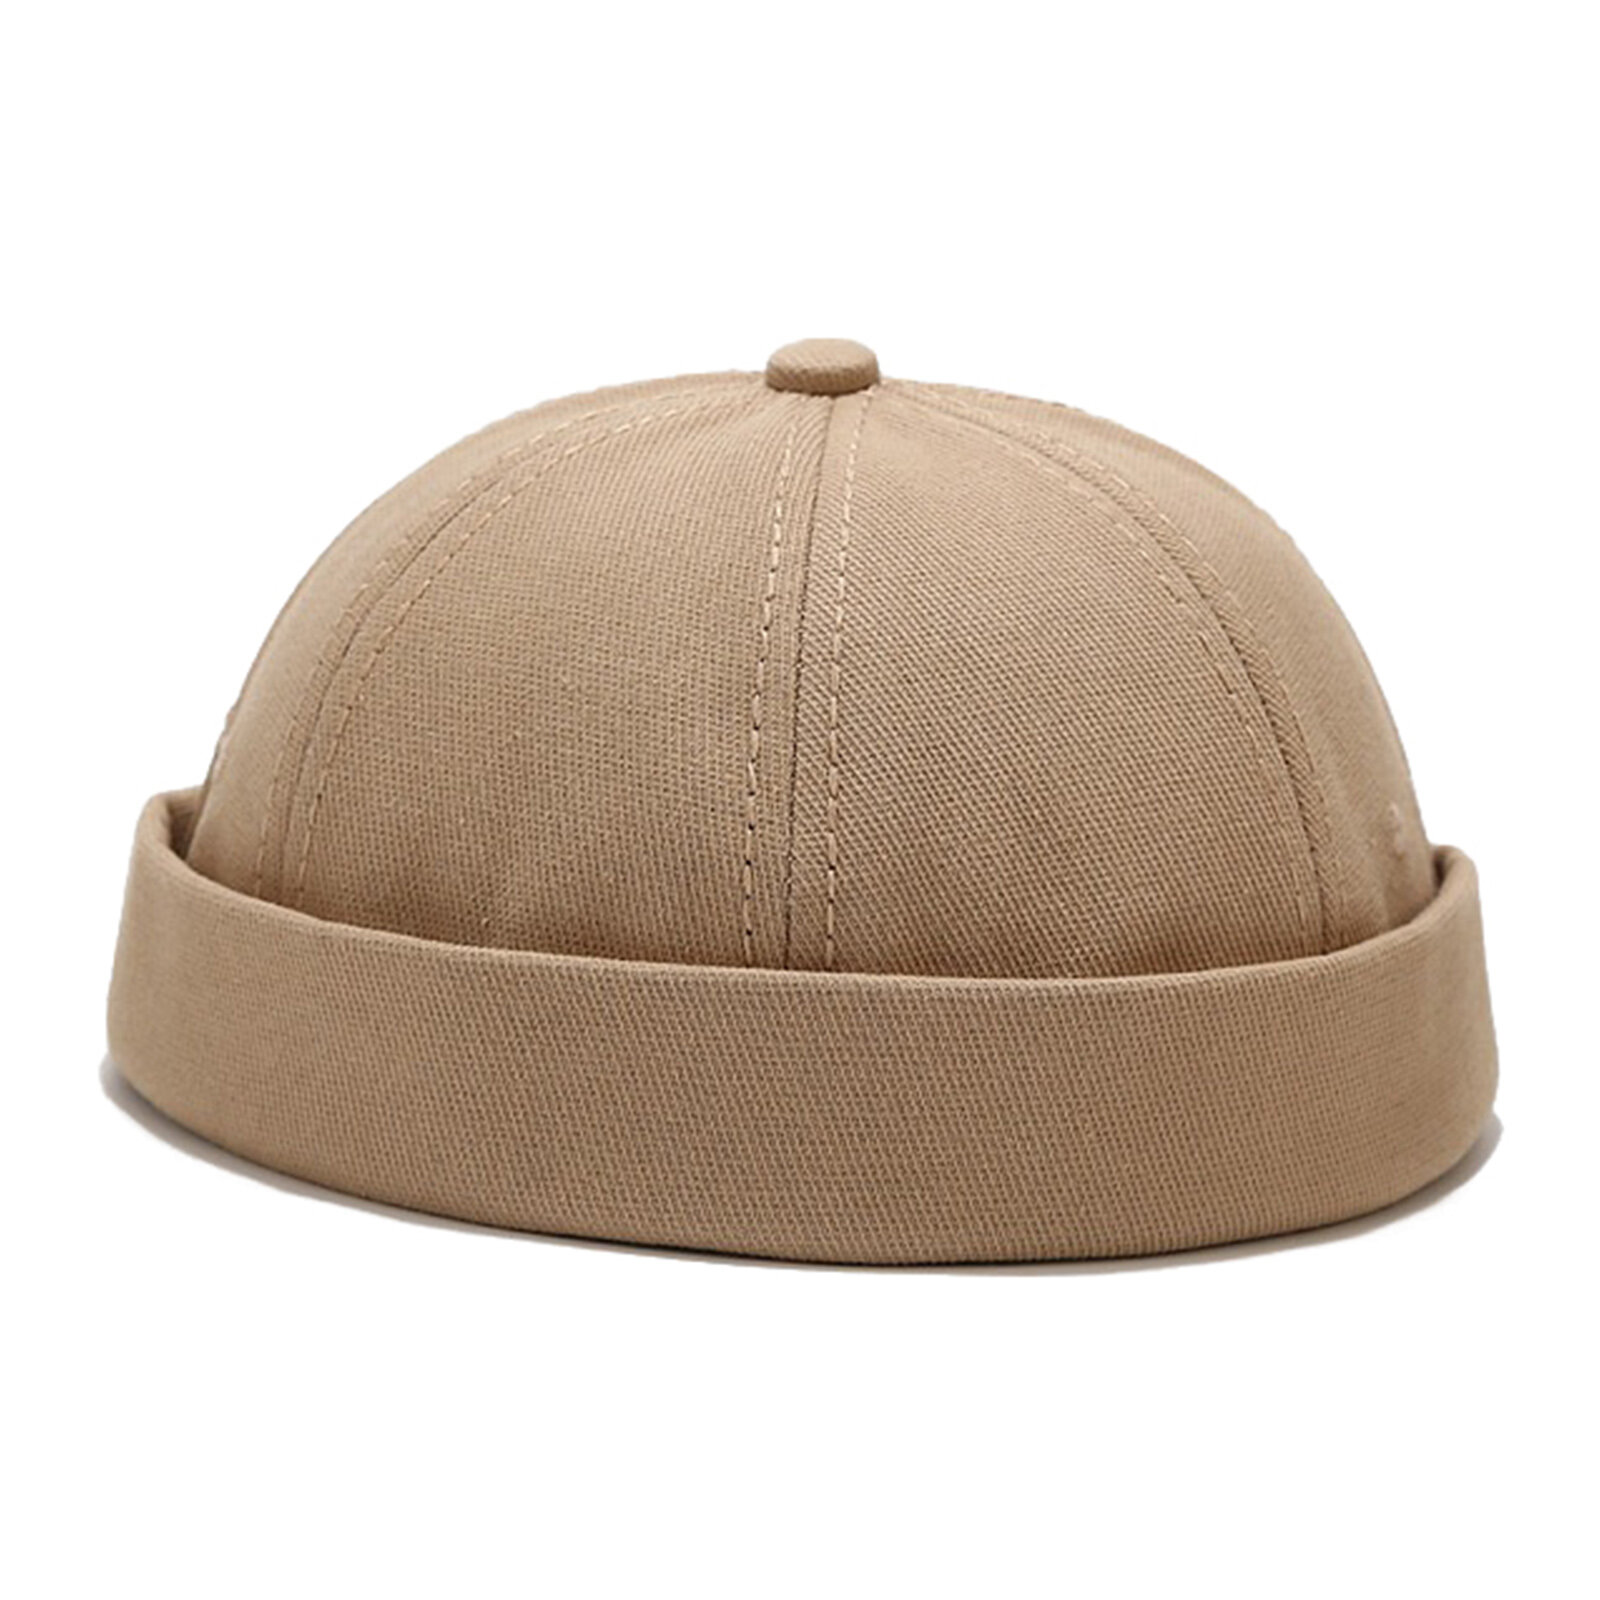 Unisex Cotton Solid Color Trendy Simple All-match Adjustable Brimless Beanie Landlord Caps Skull Cap